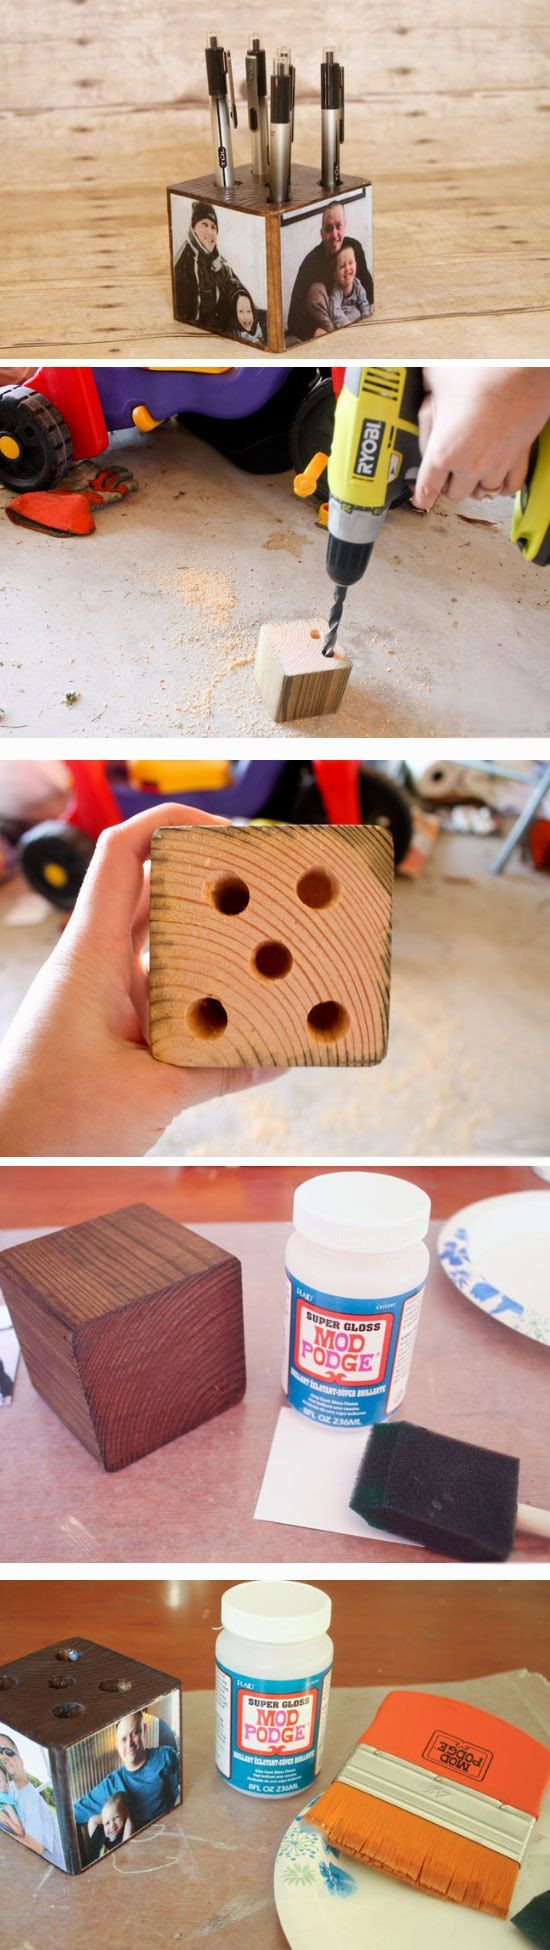 DIY Christmas Present For Dad
 Best 25 Gifts For Dad ideas on Pinterest